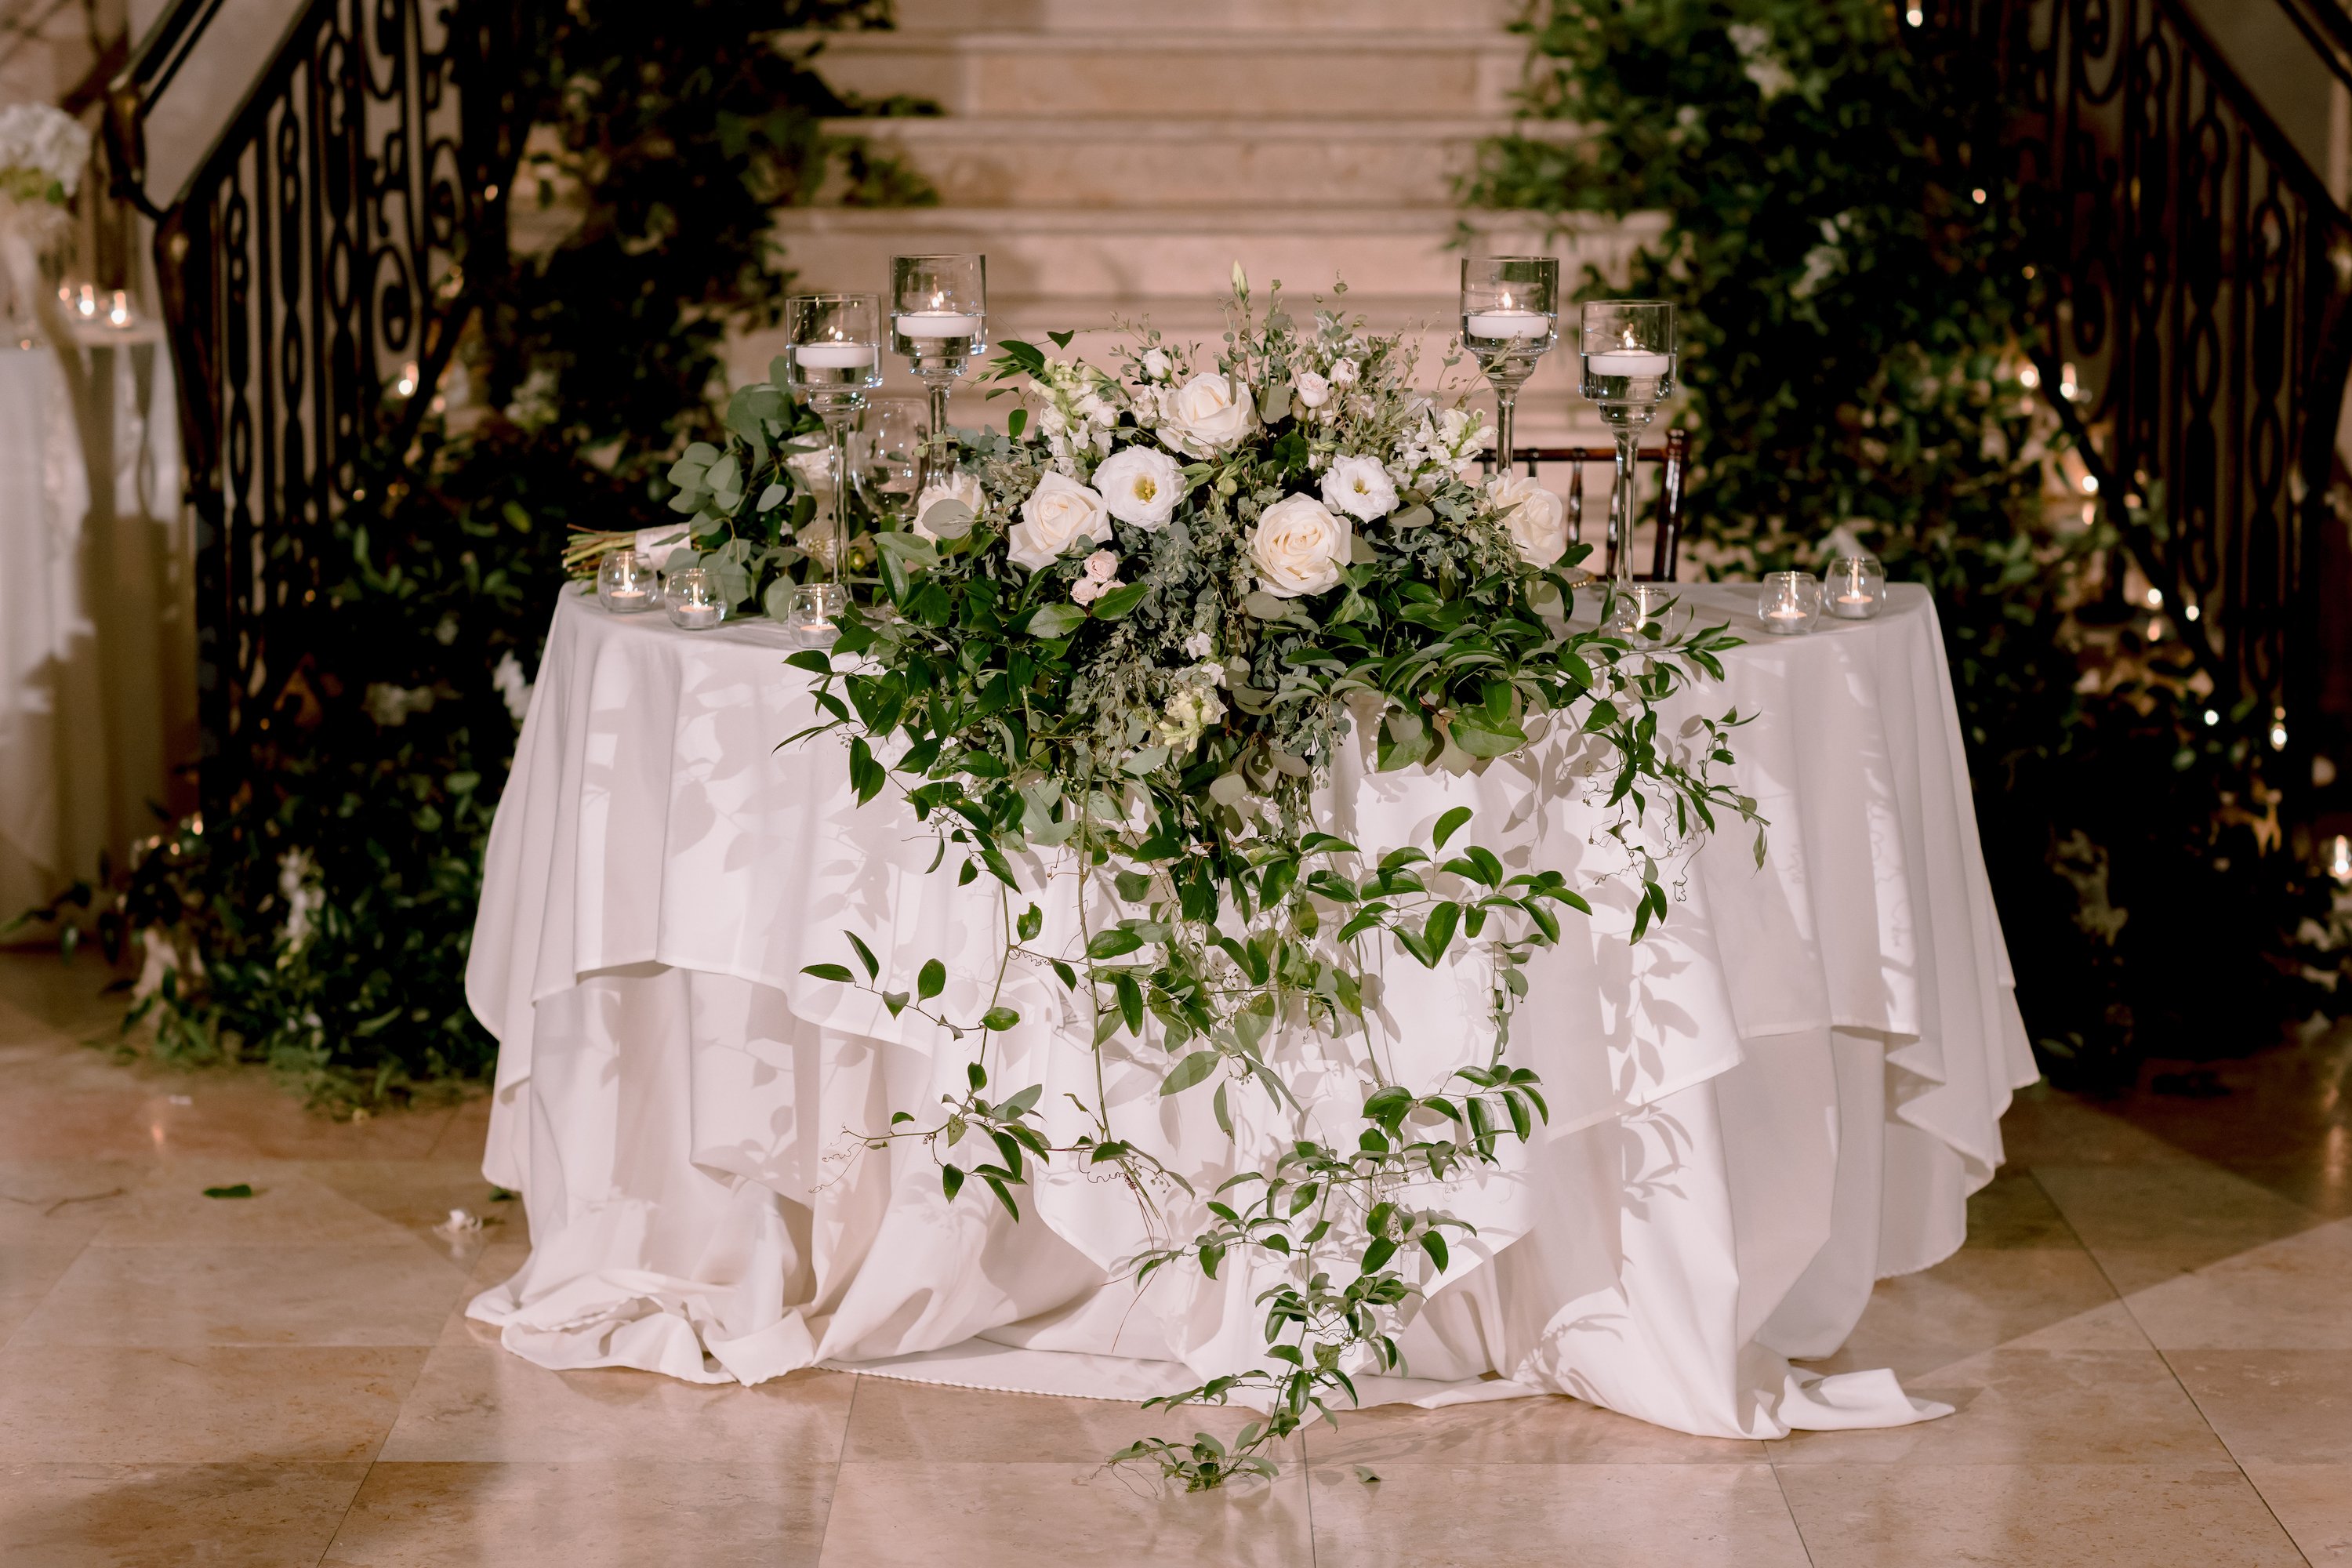 A greenery-filled table next to the grand staircase.